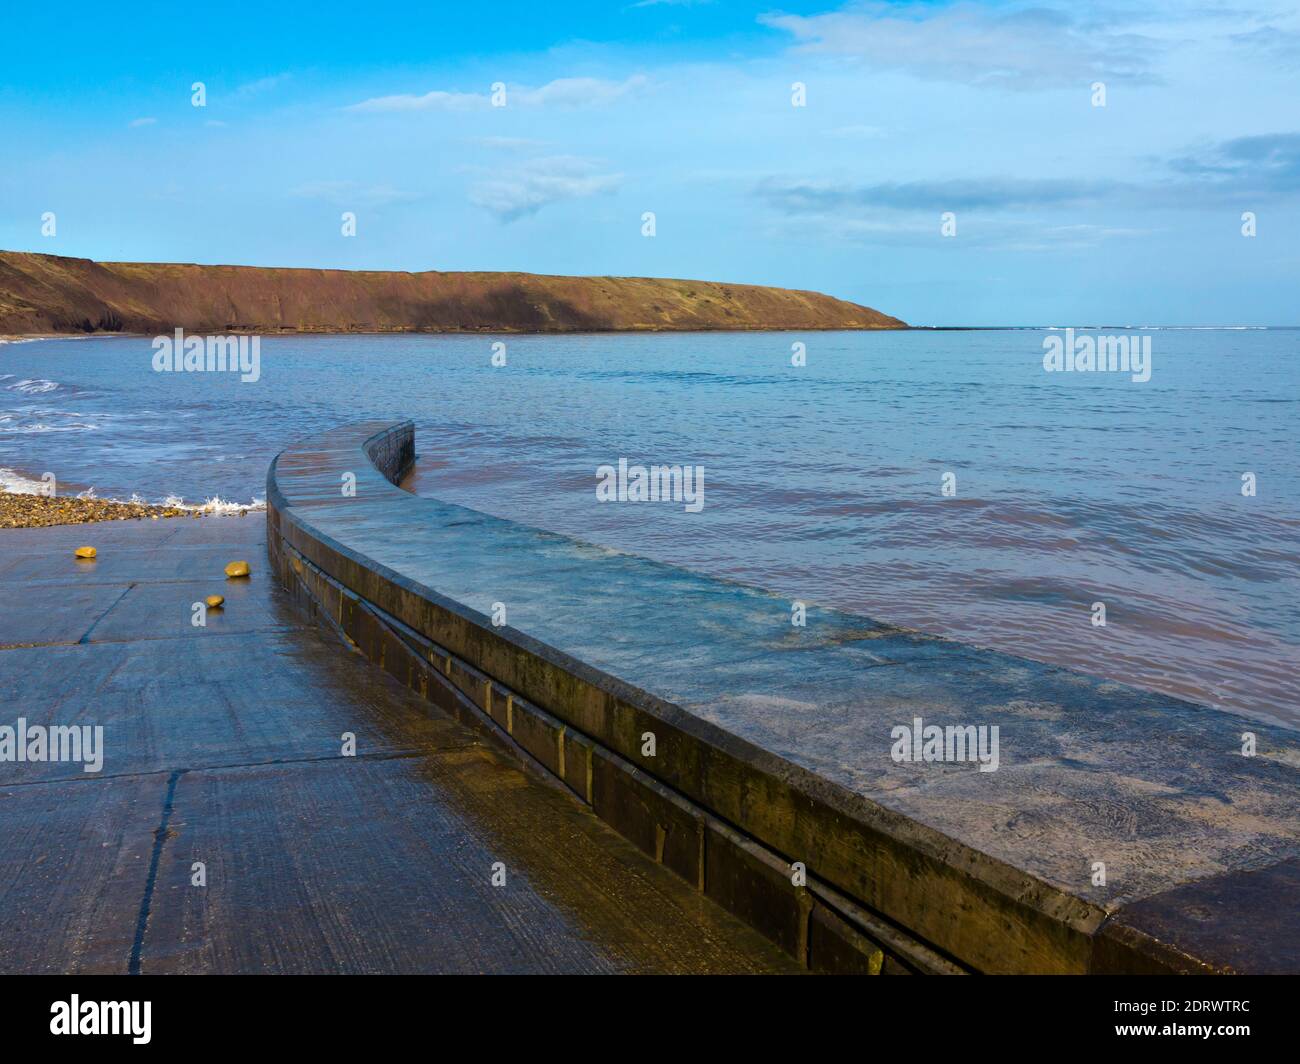 Waves and the promenade at high tide on the beach at Filey a popular seaside resort on the North Yorkshire coast in northern England UK Stock Photo